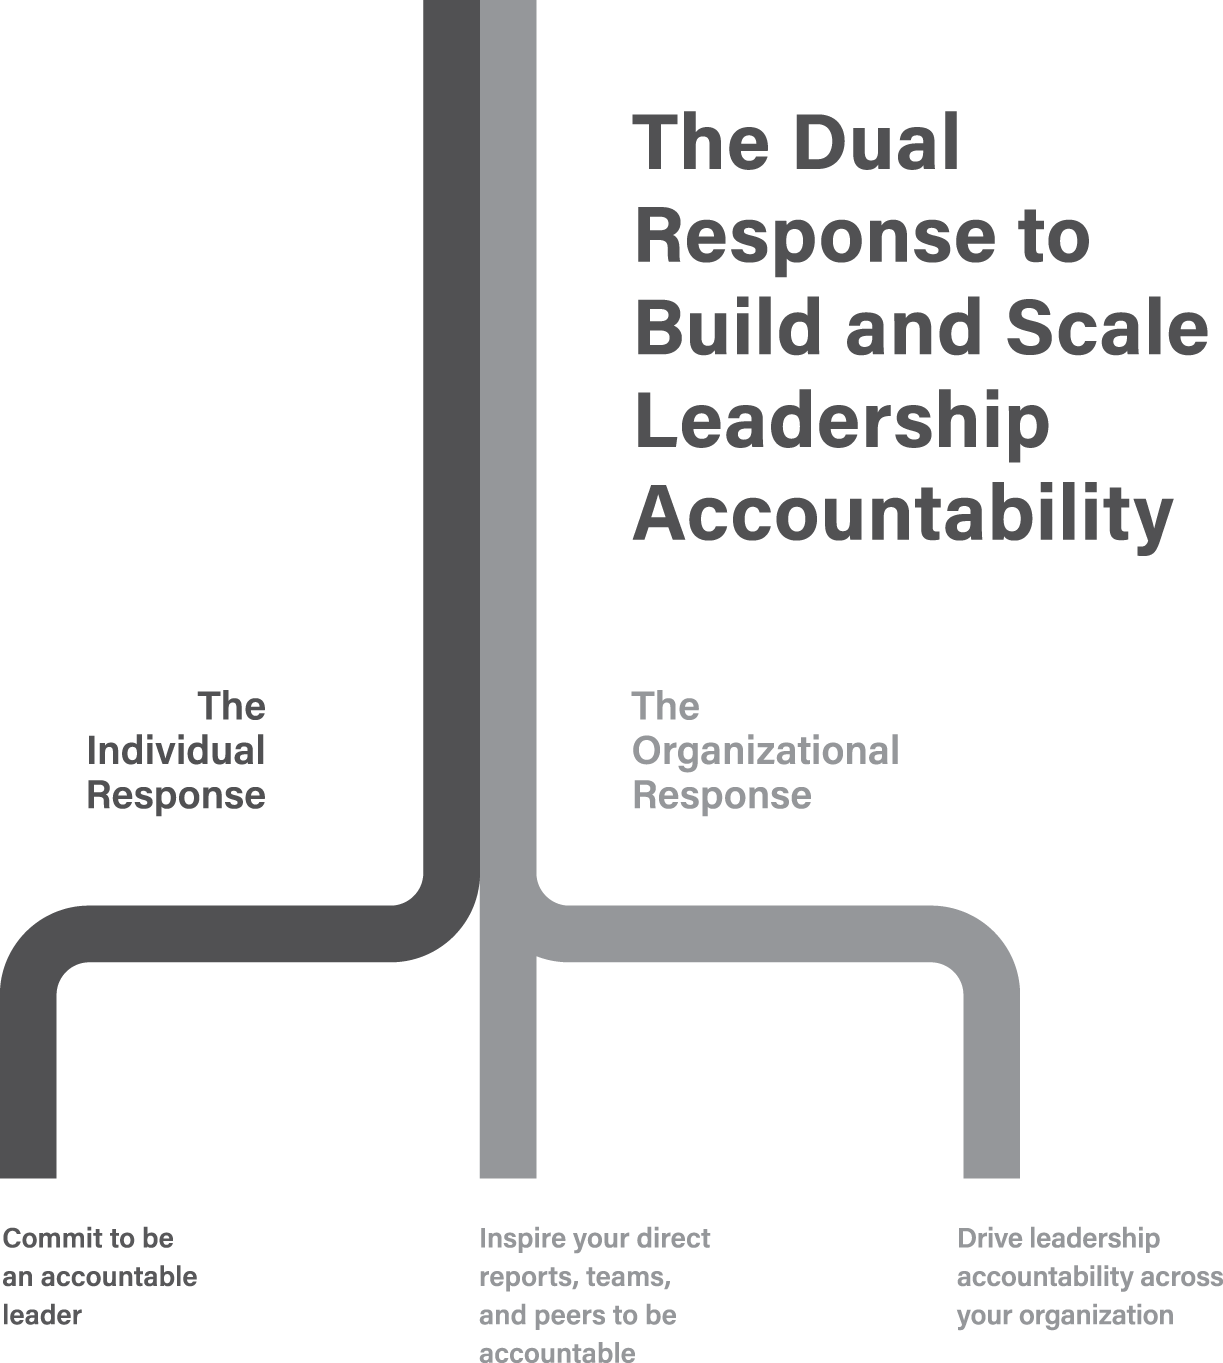 The figure illustrates how dual response plays an important role in building strong leadership accountability. 